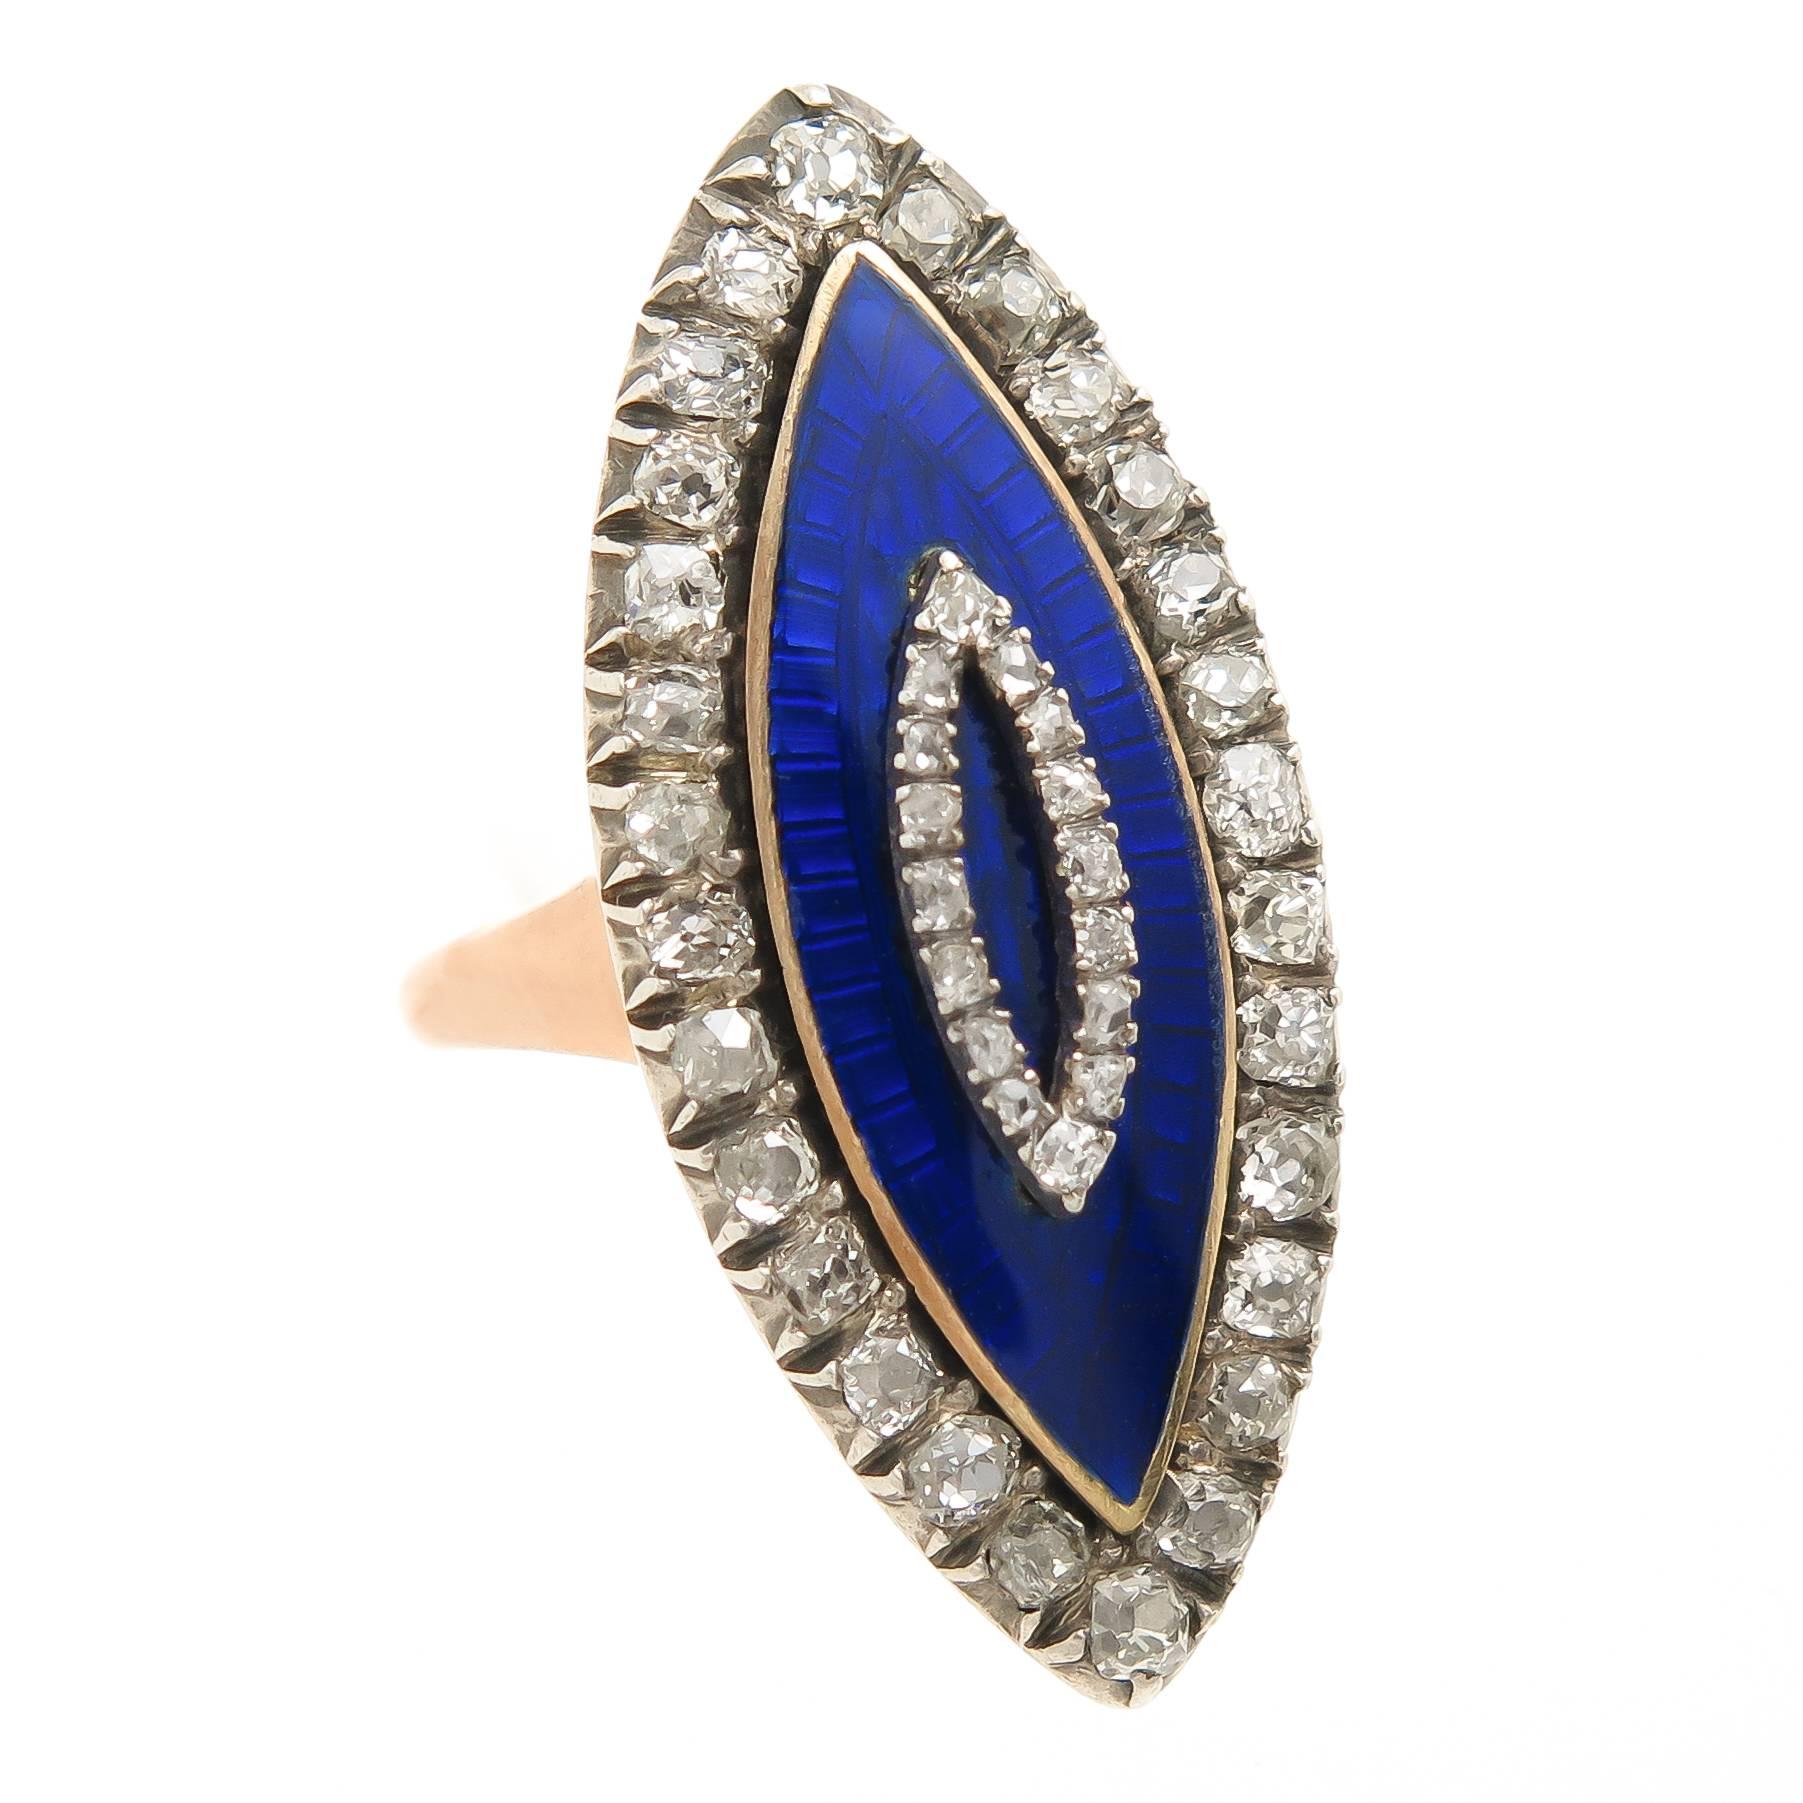 Circa 1870s Yellow  and Red Gold with silver top Navette shape ring measuring 1 1/4 inch long and 1/2 inch wide having a center of Cobalt Blue, Guilloche Enamel and set with Old Mine cut Diamonds totaling approximately 1 Carat. A very fine example